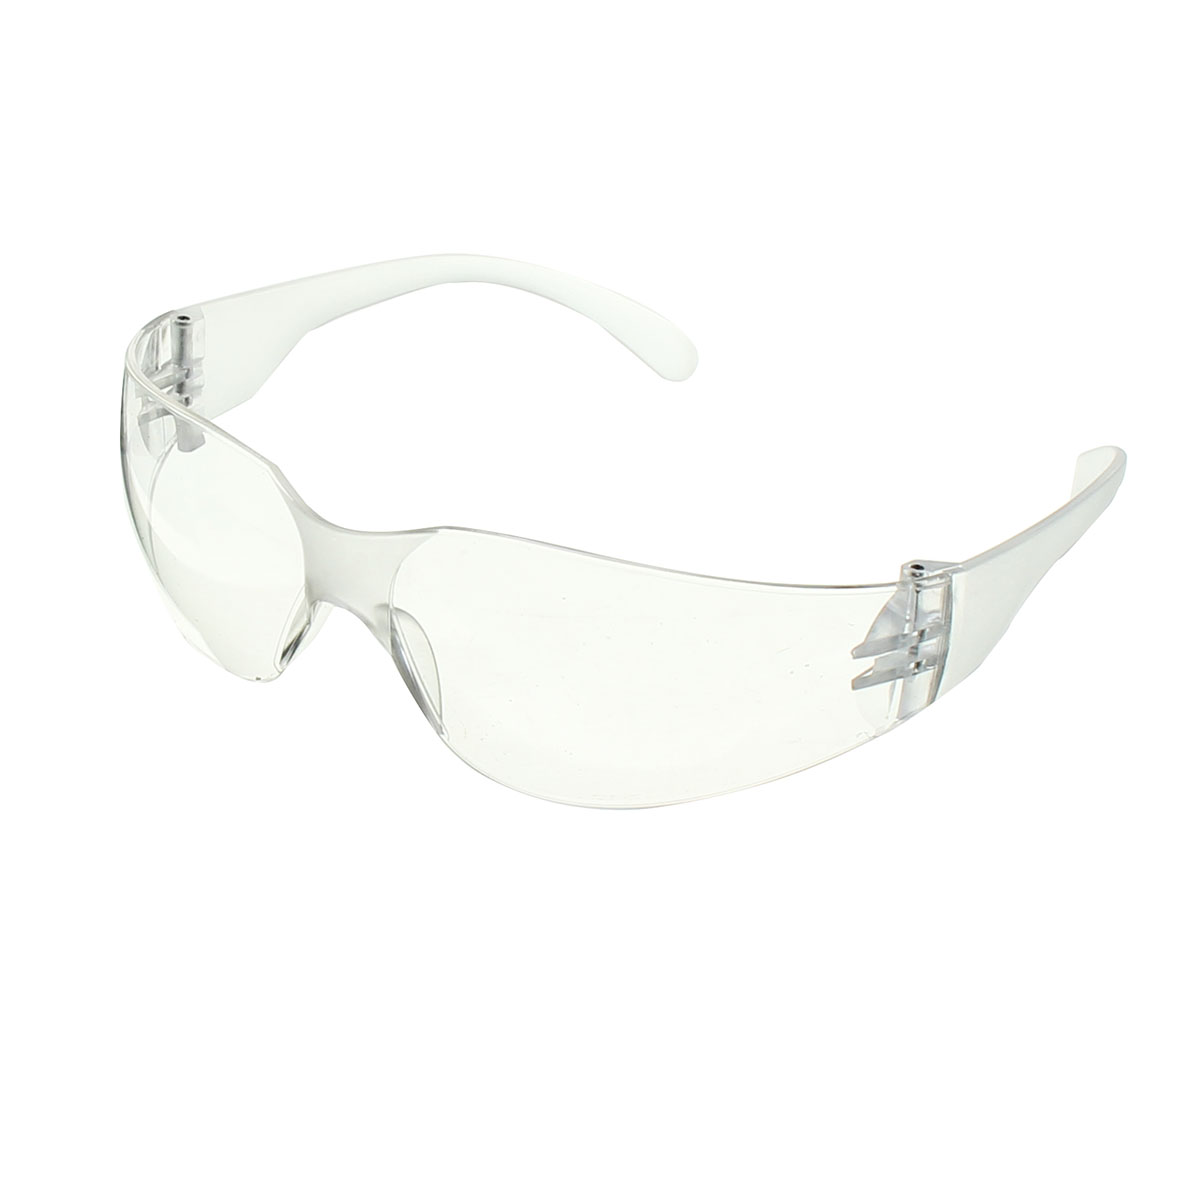 

Safety Glasses Spectacles Lab Eye Protection Protective Eyewear Clear Lens